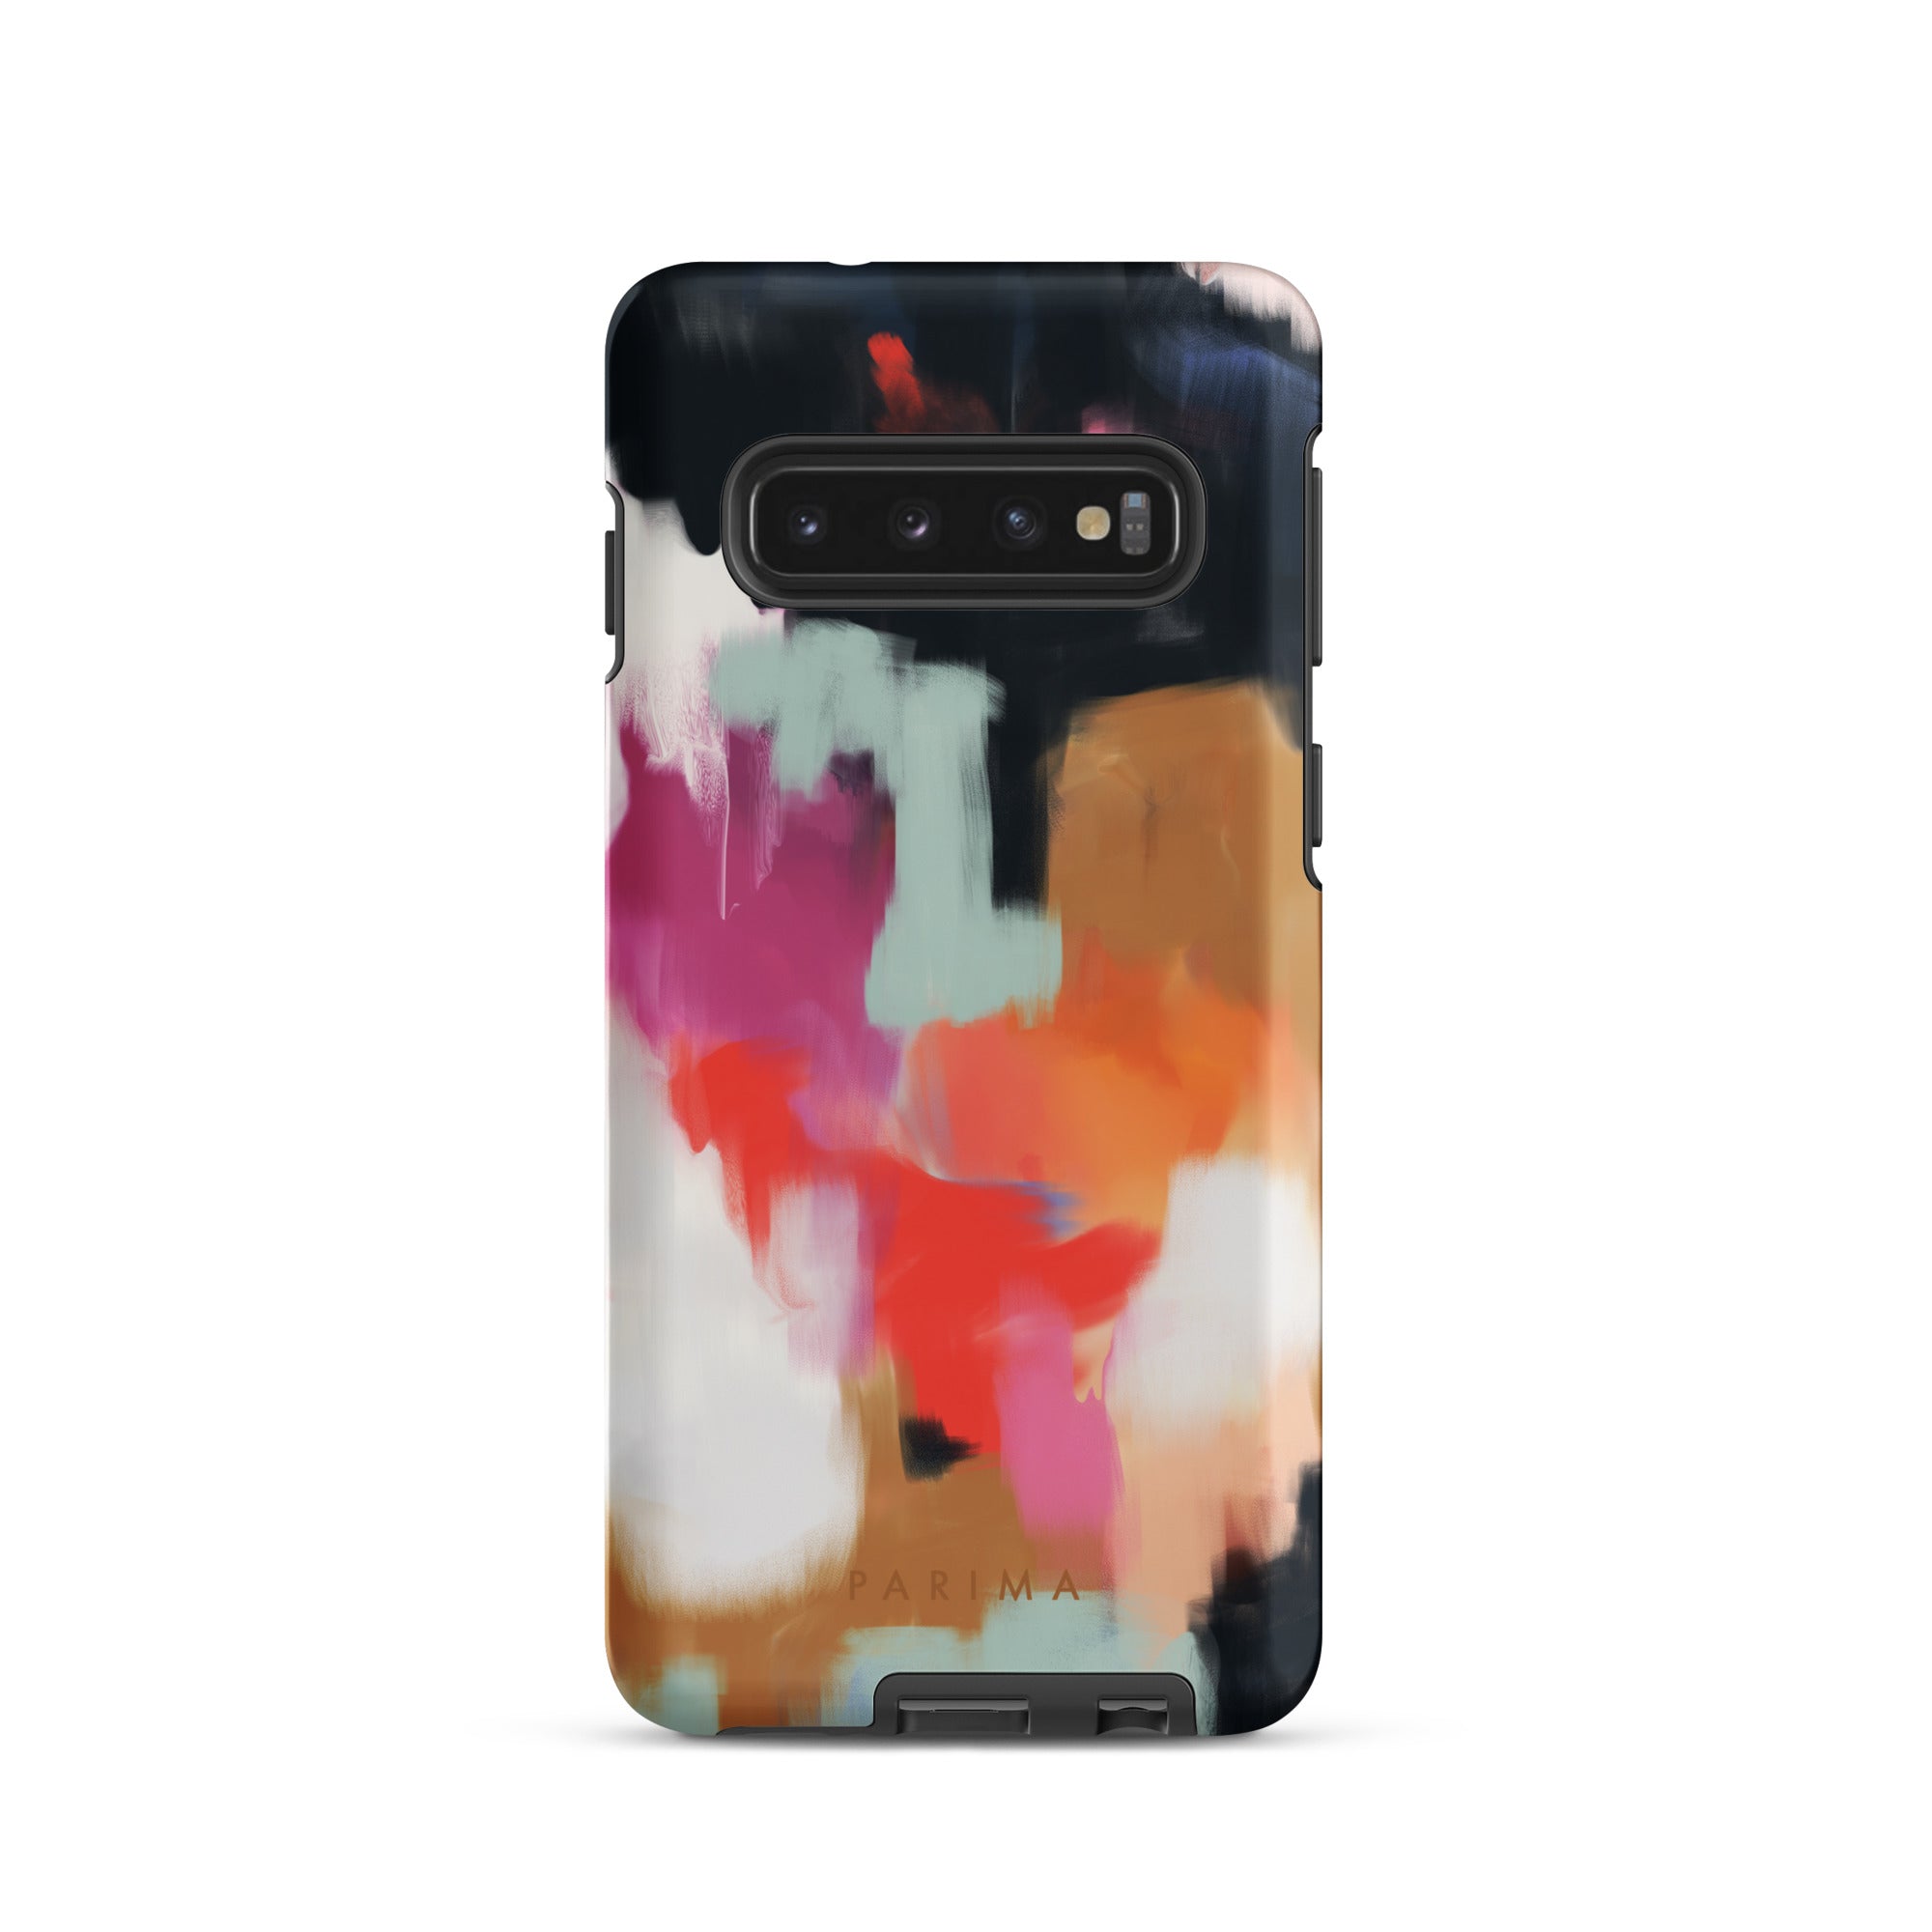 Ruthie, blue and pink abstract art on Samsung Galaxy S10 tough case by Parima Studio